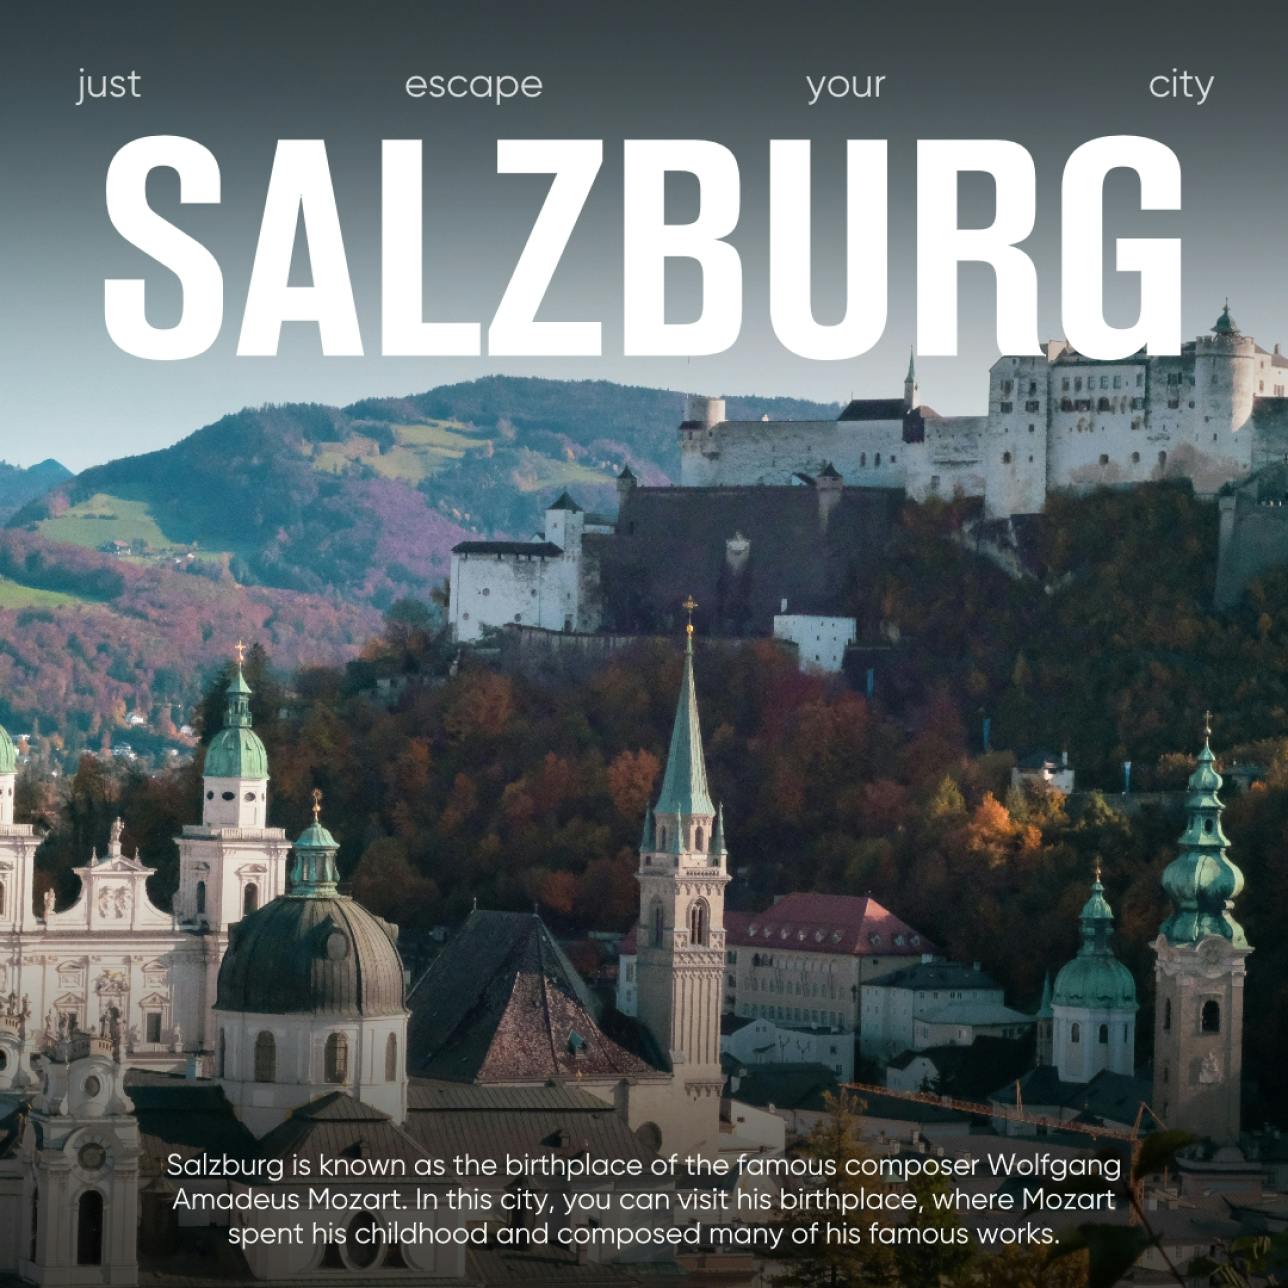 Scavenger hunt through Salzburg old town with your phone